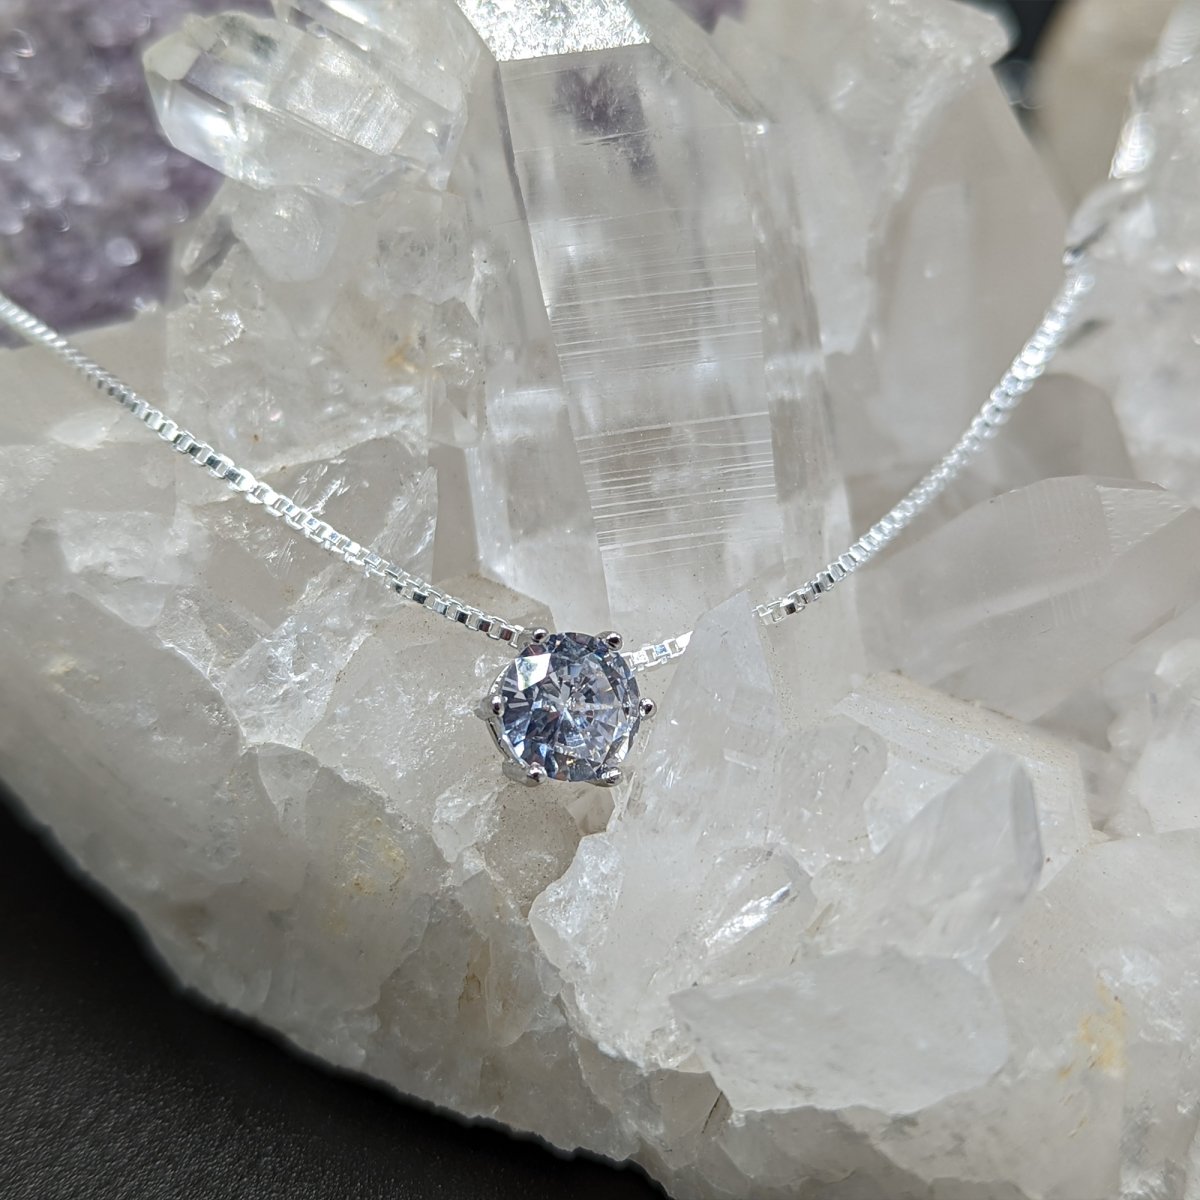 Auntie Gift - Dainty CZ Sterling Silver Necklace - Meaningful Cards